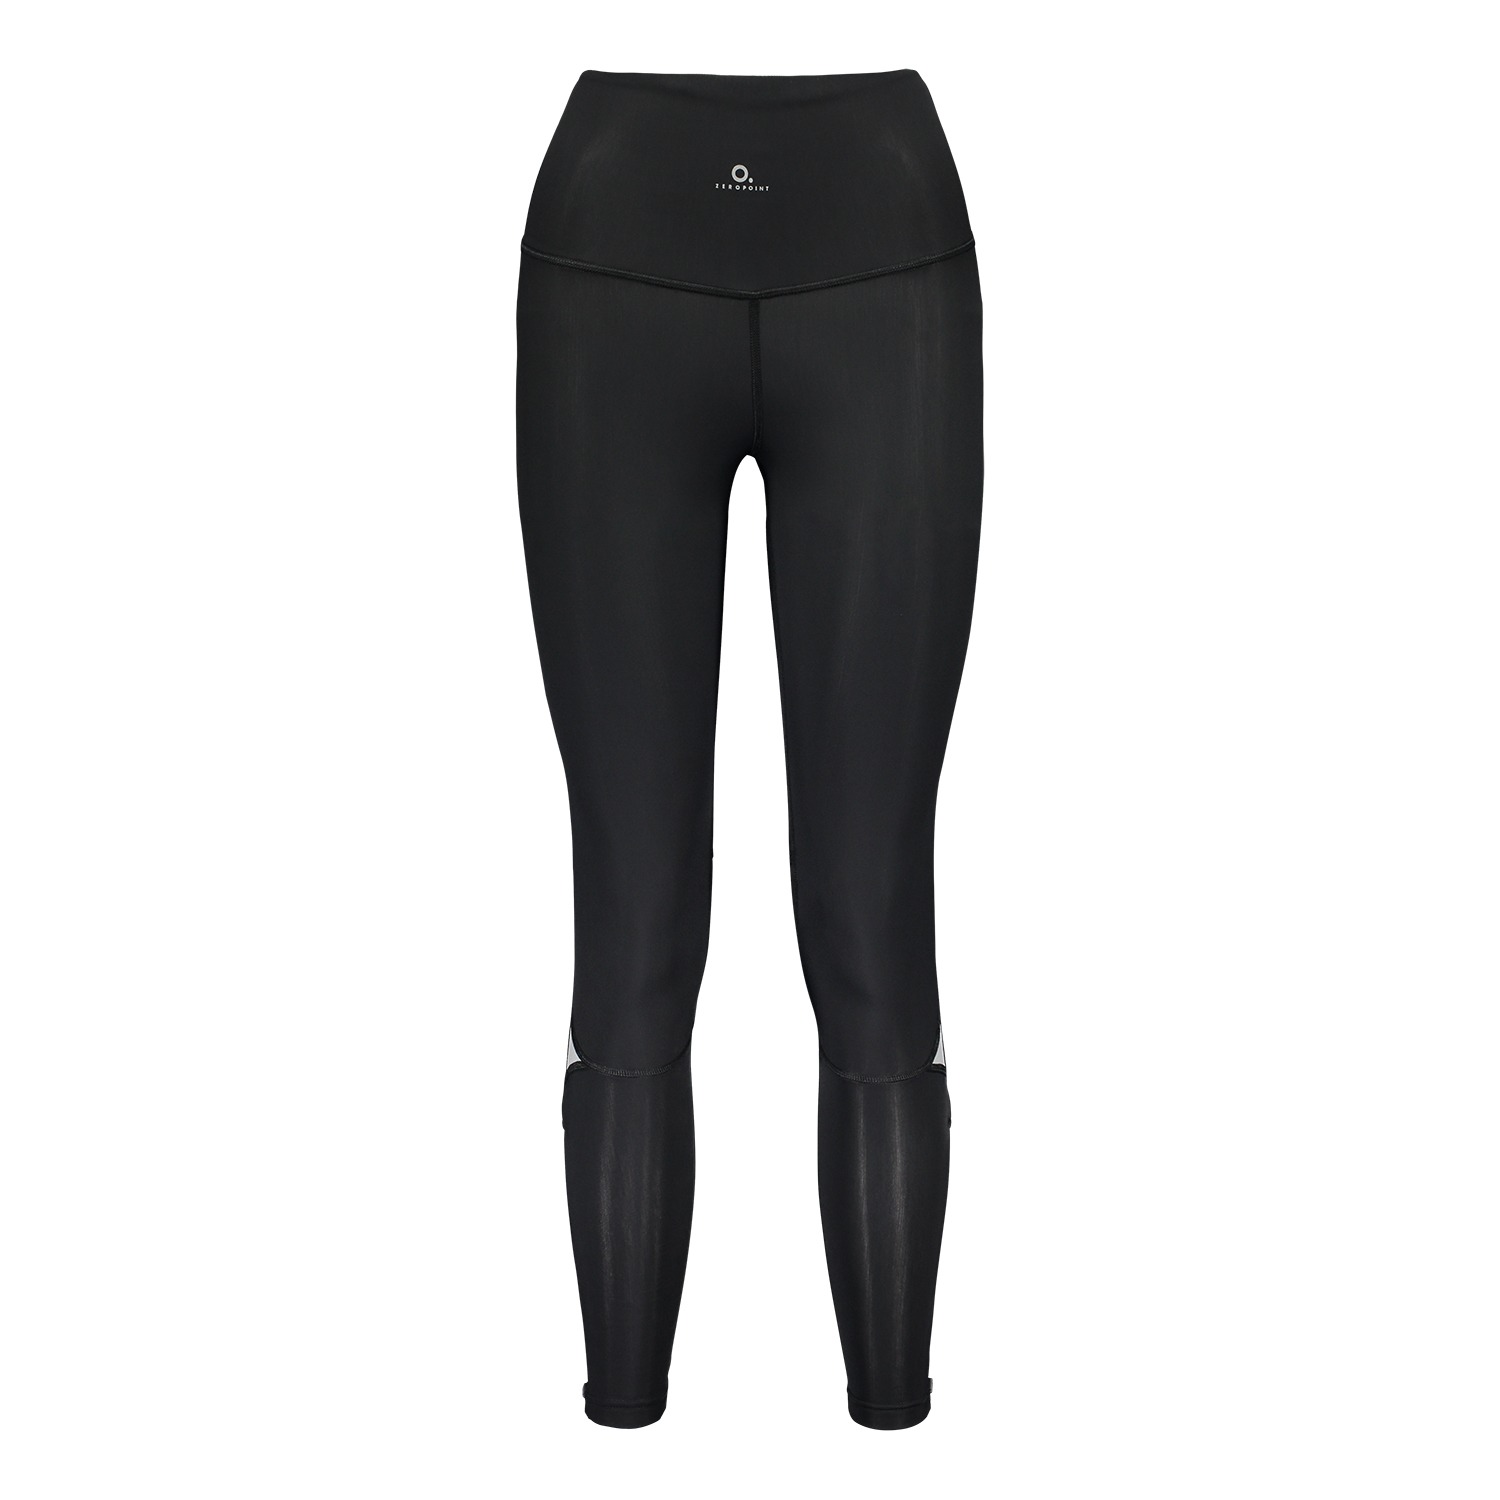 Thermal Compression Tights Women - Zeropoint Compression